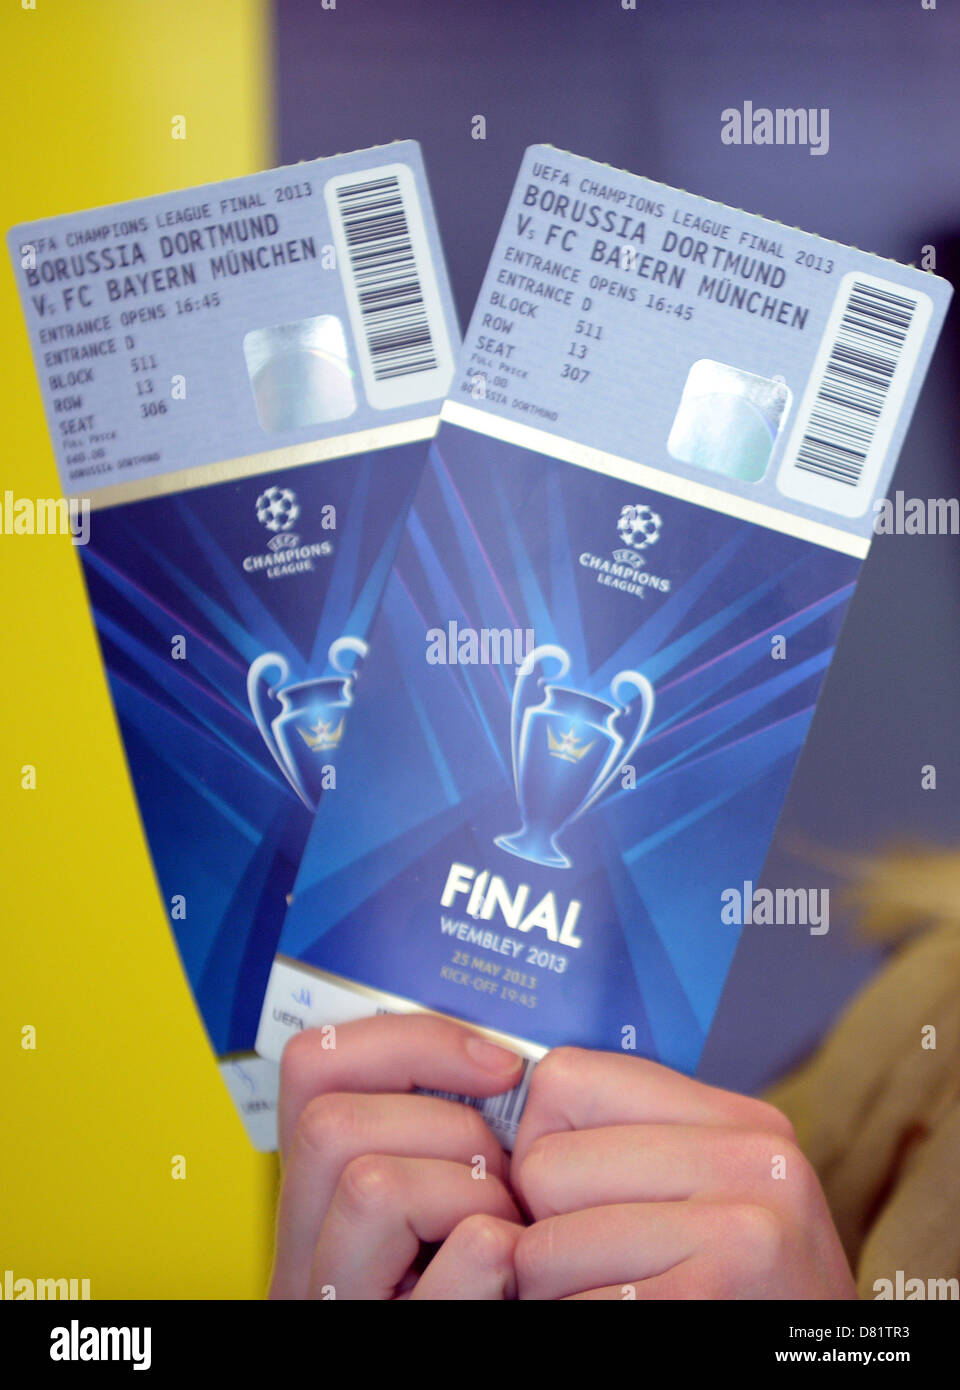 champions league final ticket prices